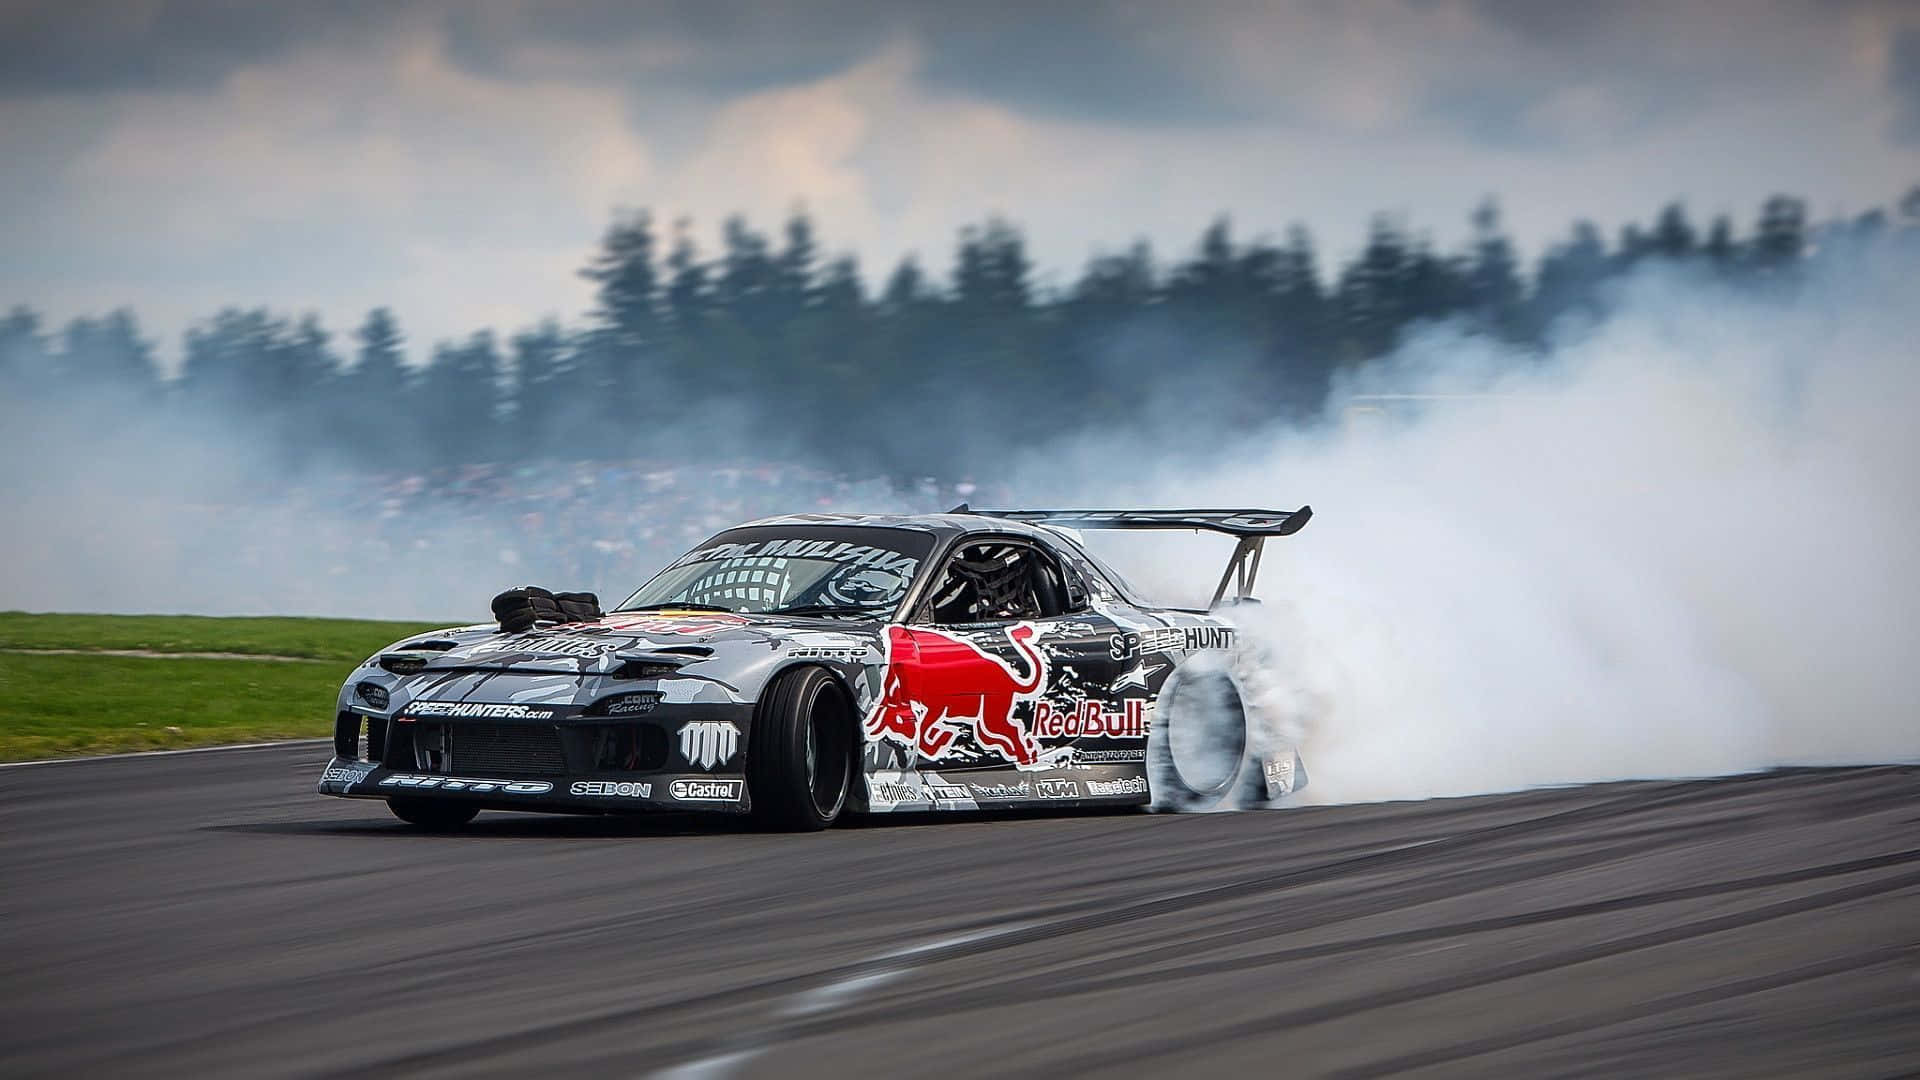 Experience the thrill of drifting with the powerful Toyota Supra. Wallpaper